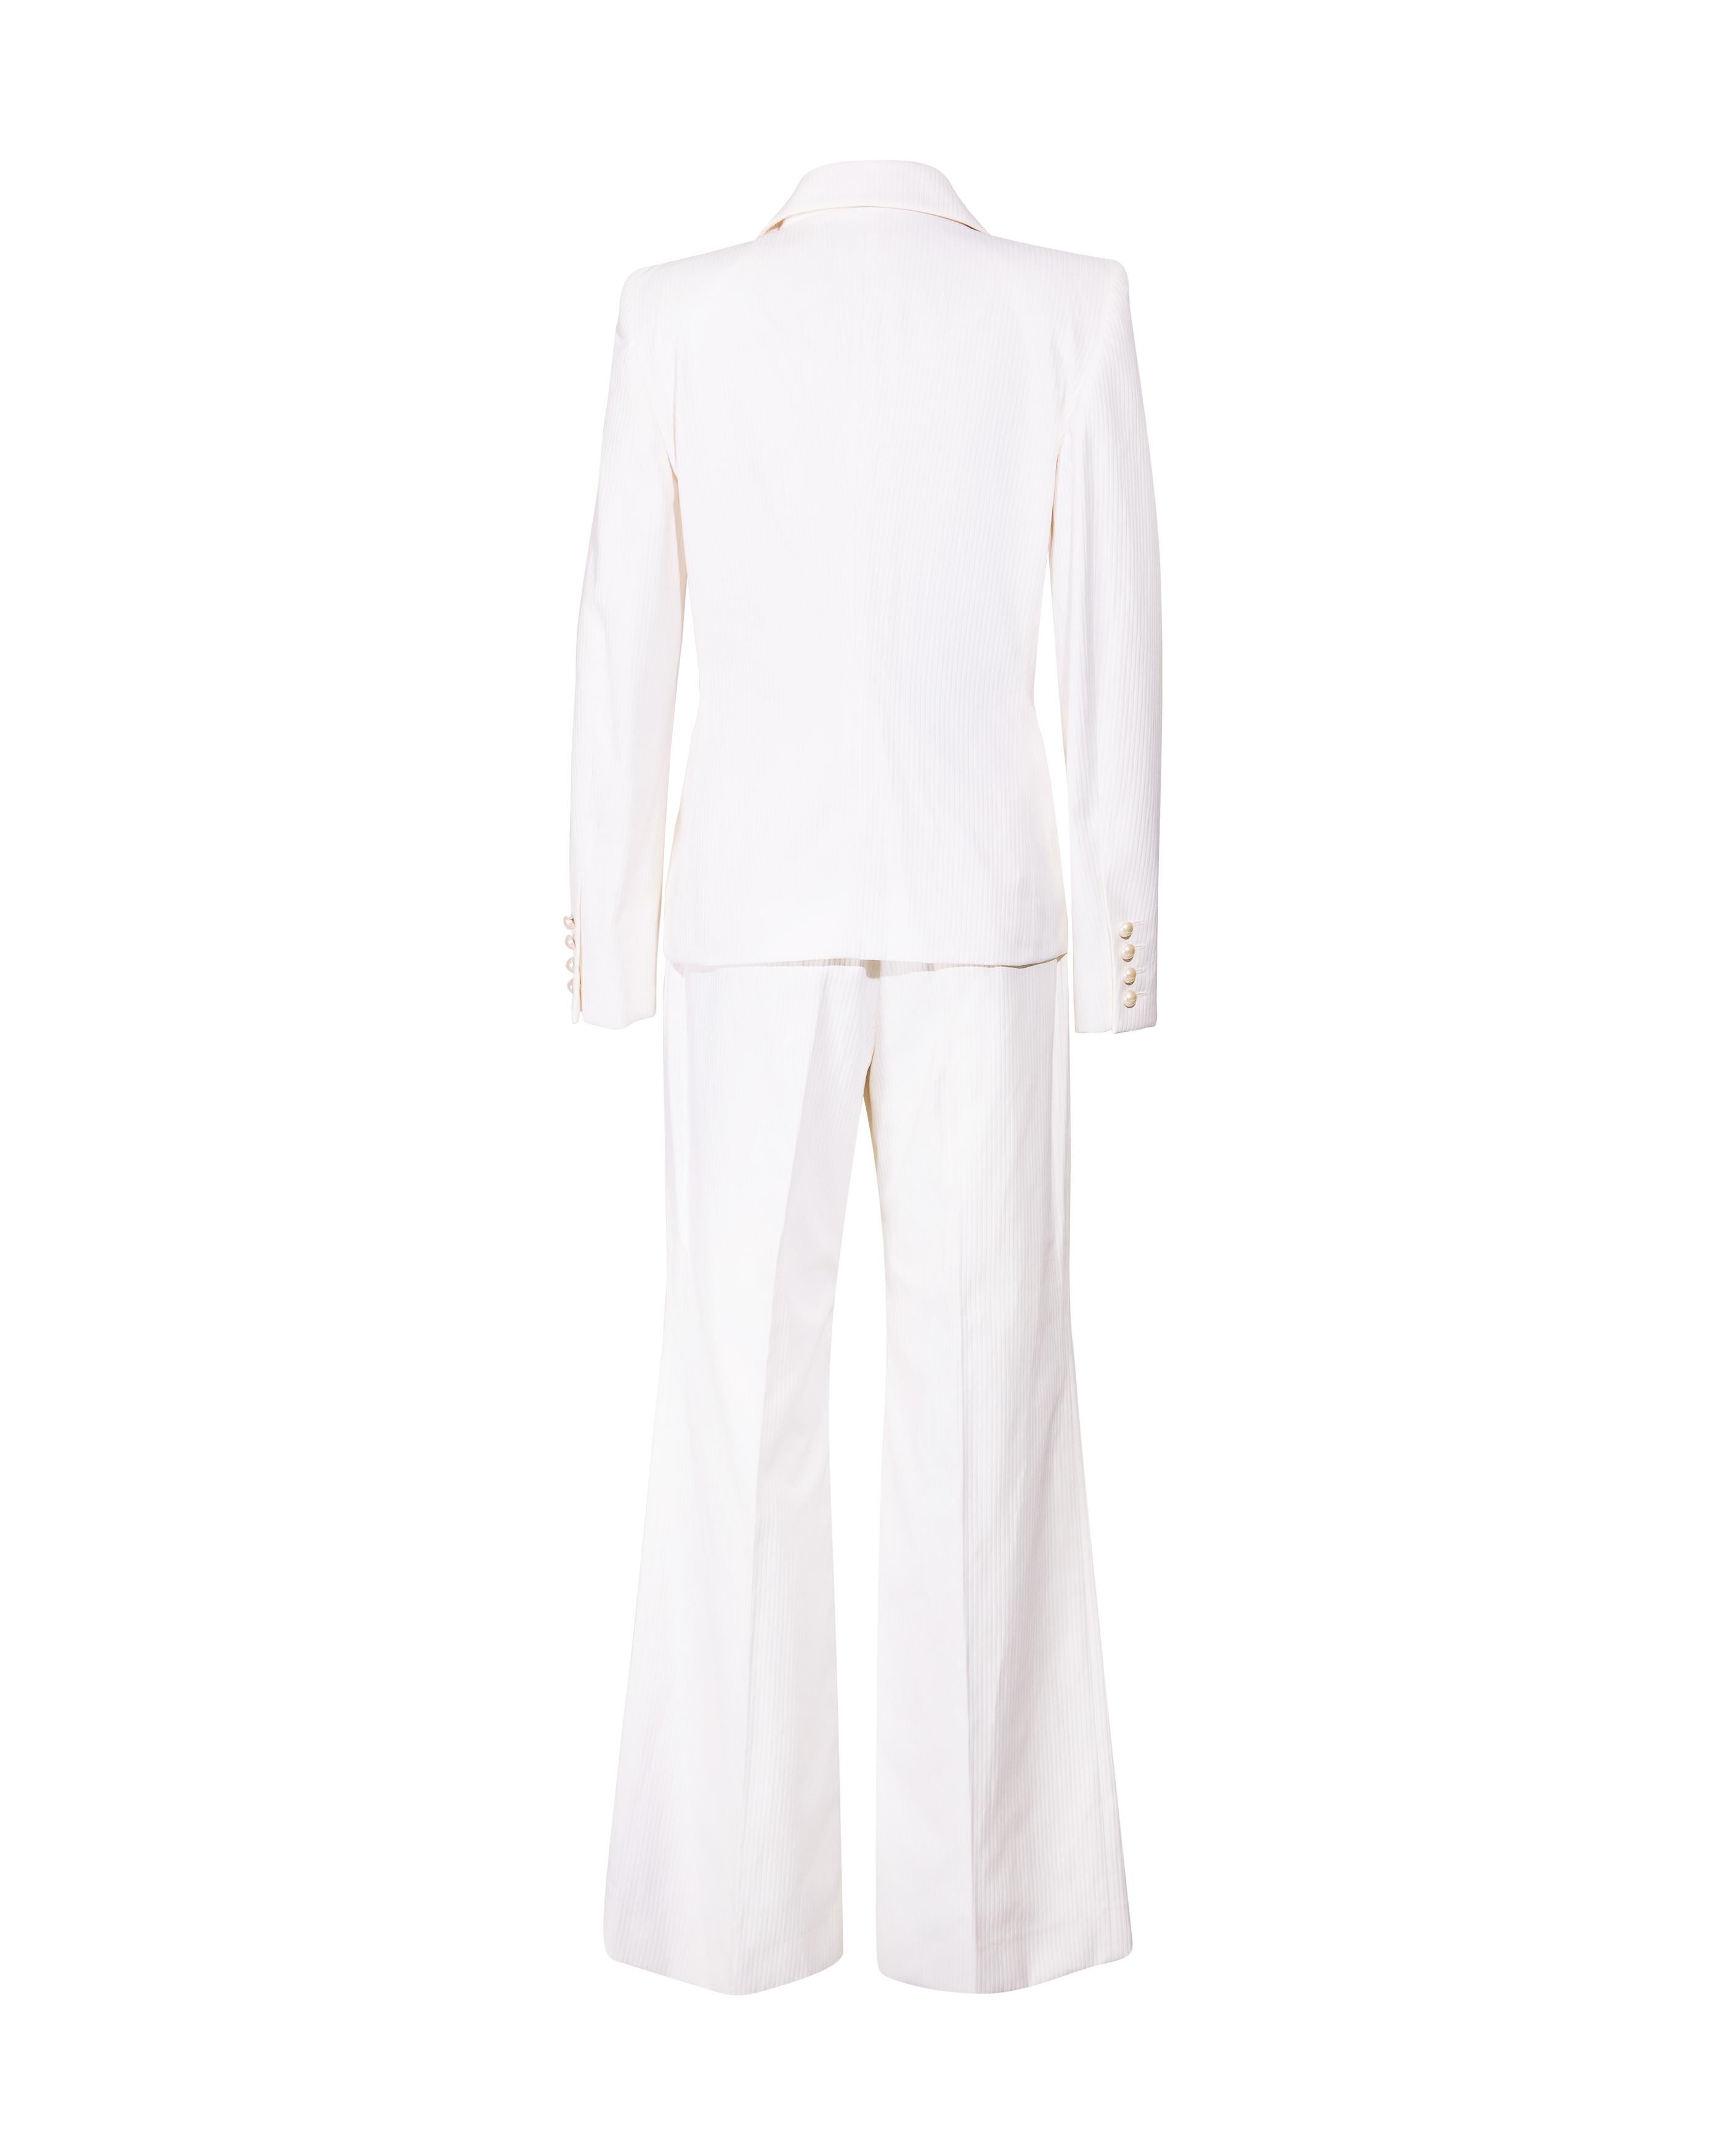 S/S 2001 Chanel Double-Breasted White Suit Set 4